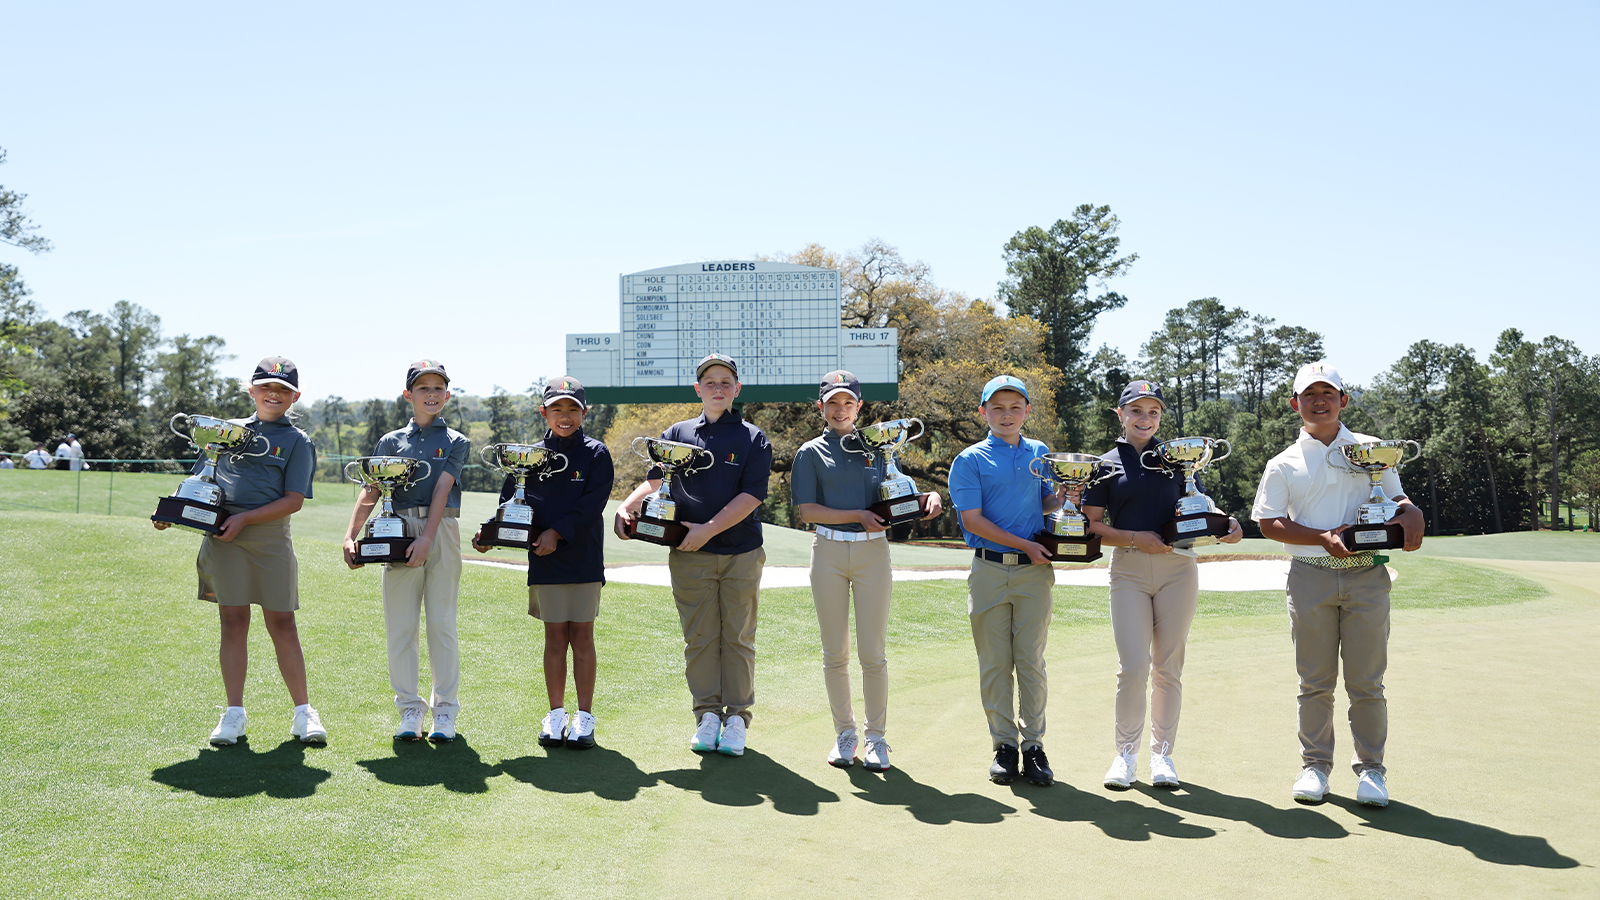 The overall winners pose for a photo on the 18th green after the Drive, Chip and Putt Championship at Augusta National Golf Club on April 03, 2022 in Augusta, Georgia. (Photo by Gregory Shamus/Getty Images)